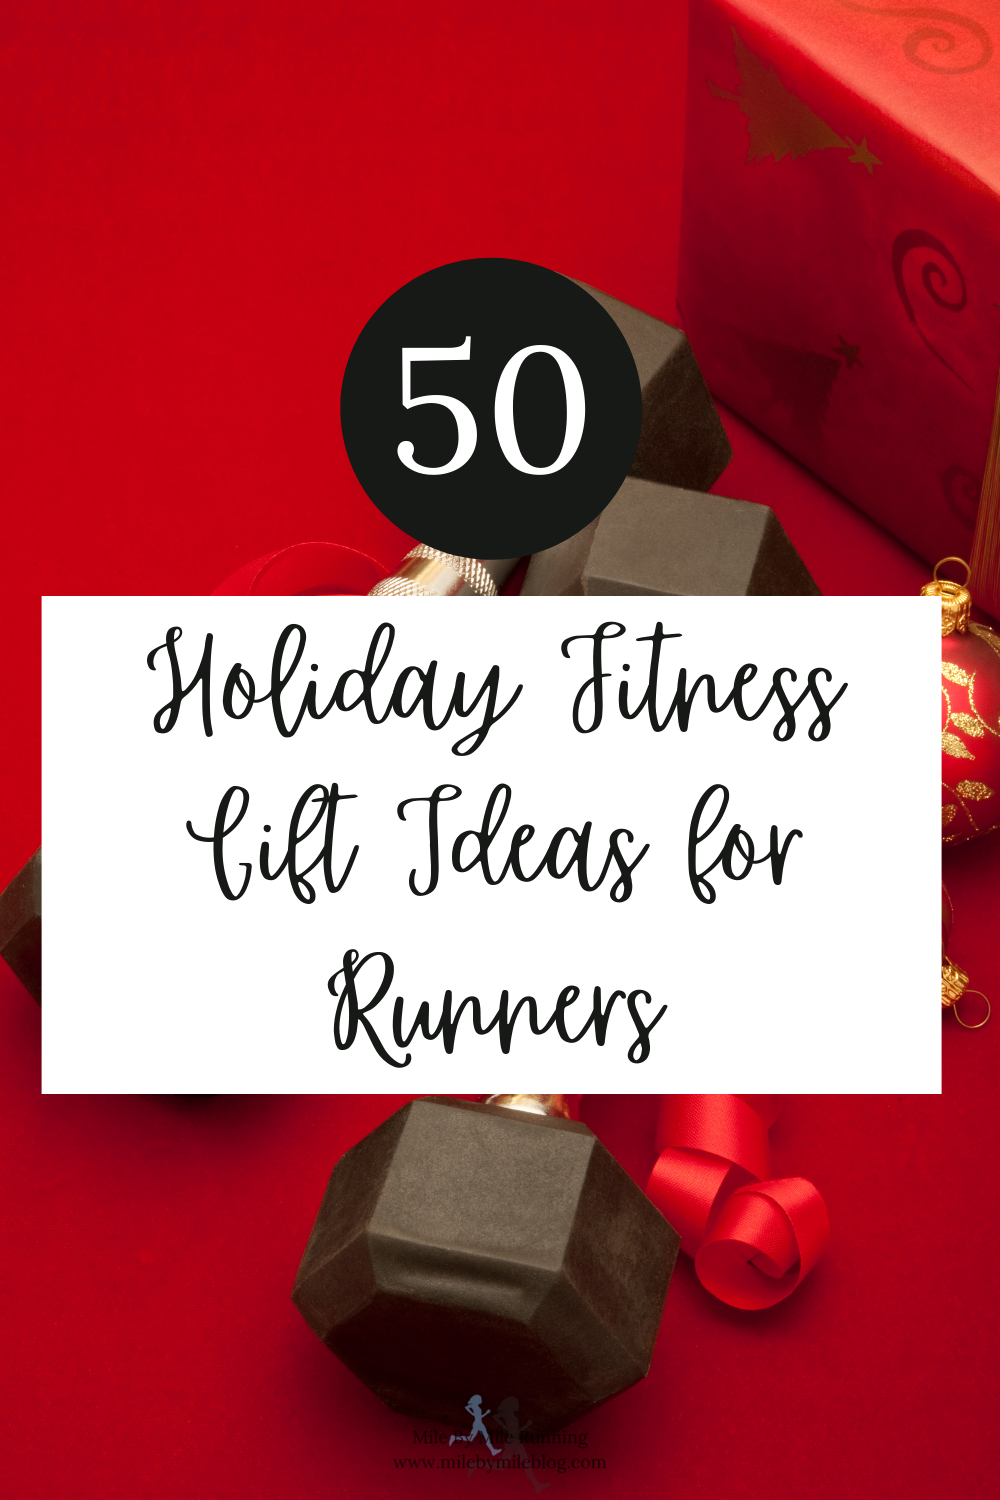 The holidays are approaching faster than ever this year, so it's time to start finding those perfect fitness gift ideas for the runners in our lives (and ourselves!) This list of gift ideas has a wide range of products that most runners will love.